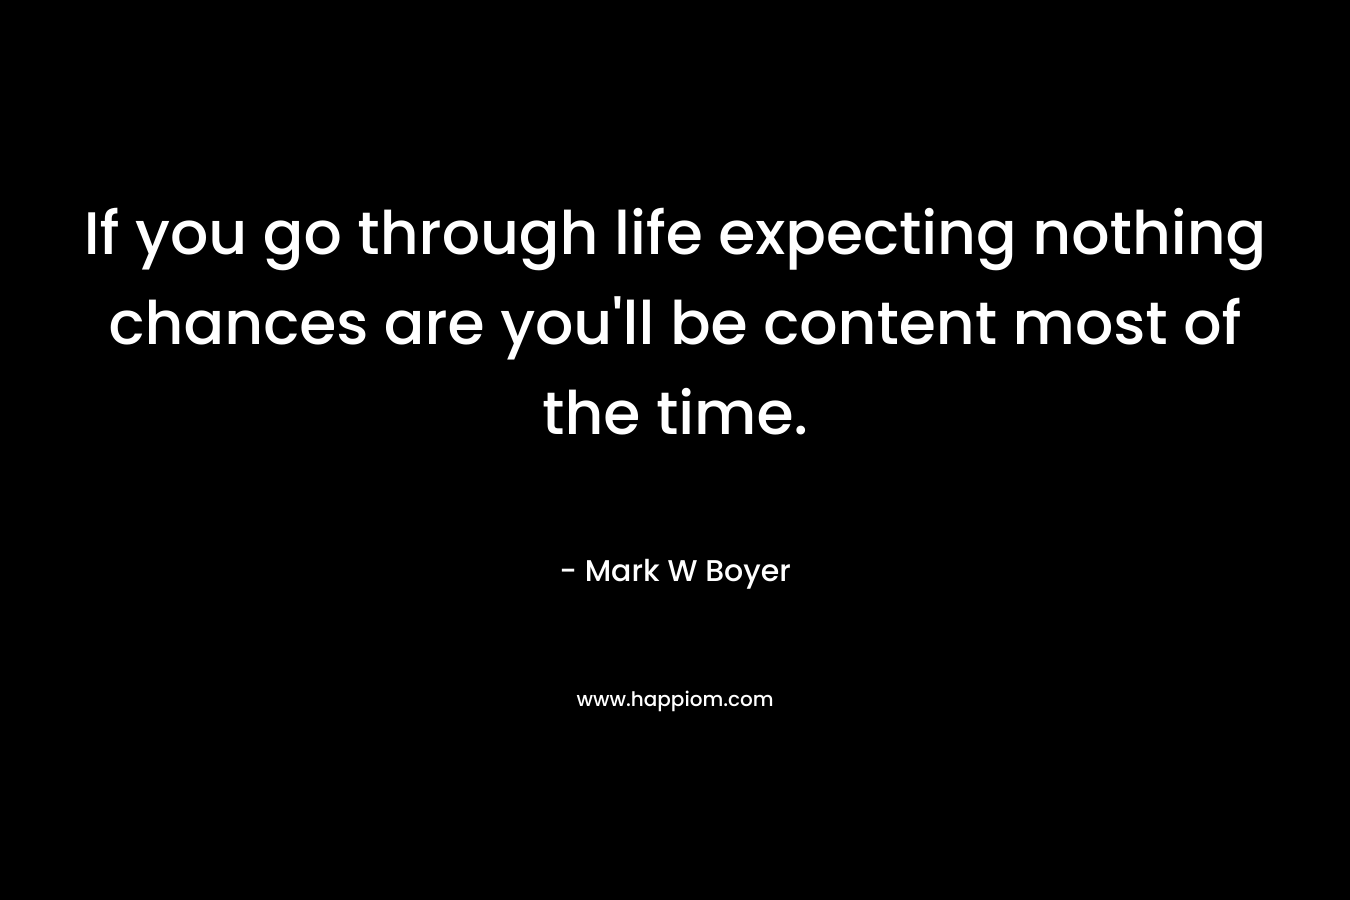 If you go through life expecting nothing chances are you'll be content most of the time.